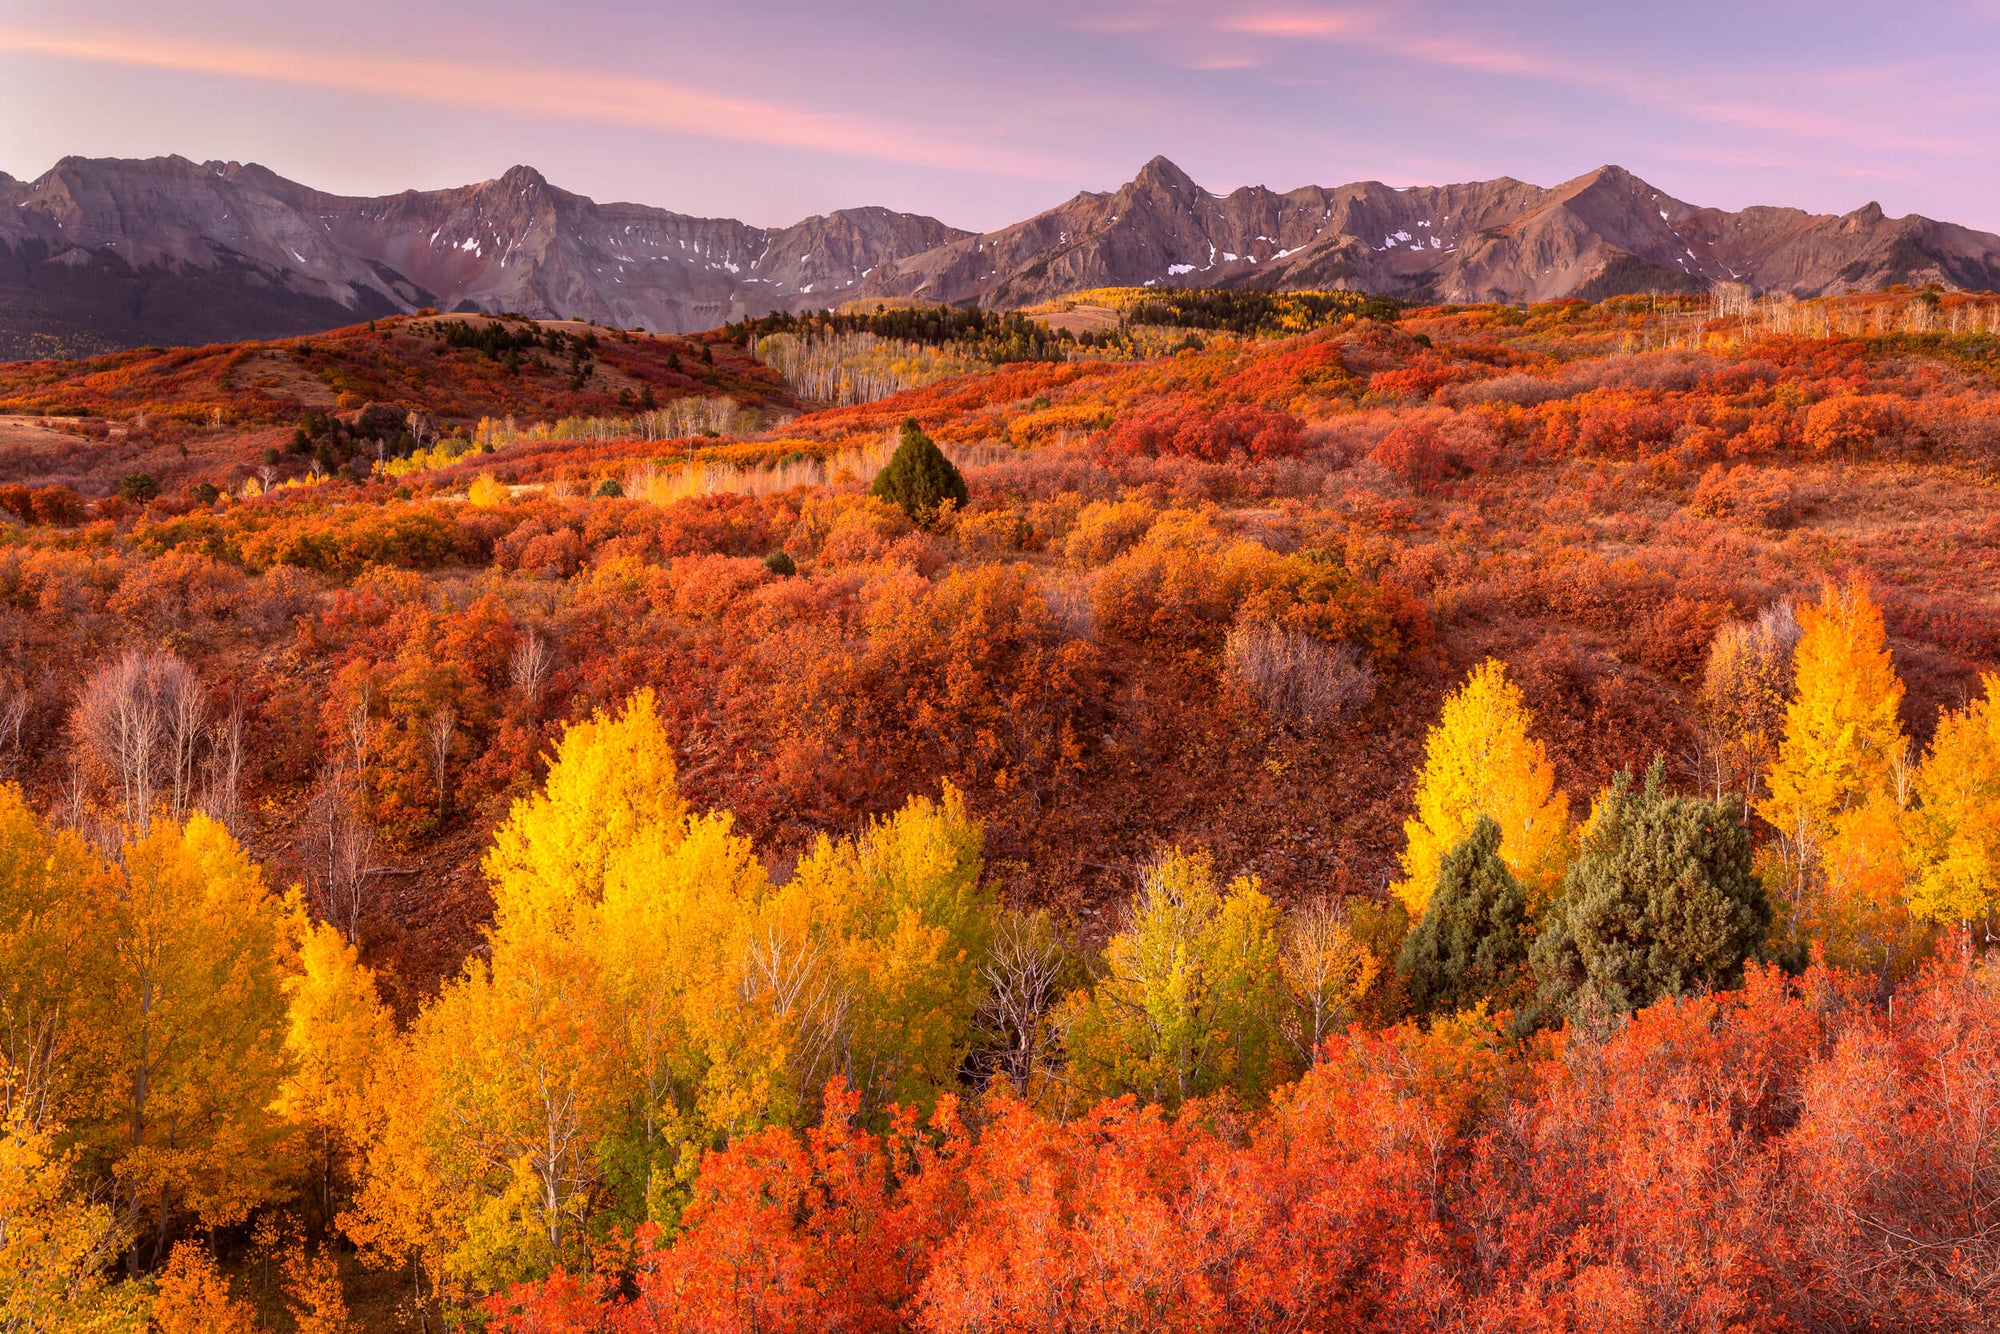 A Dallas Divide picture captured near Telluride during fall.